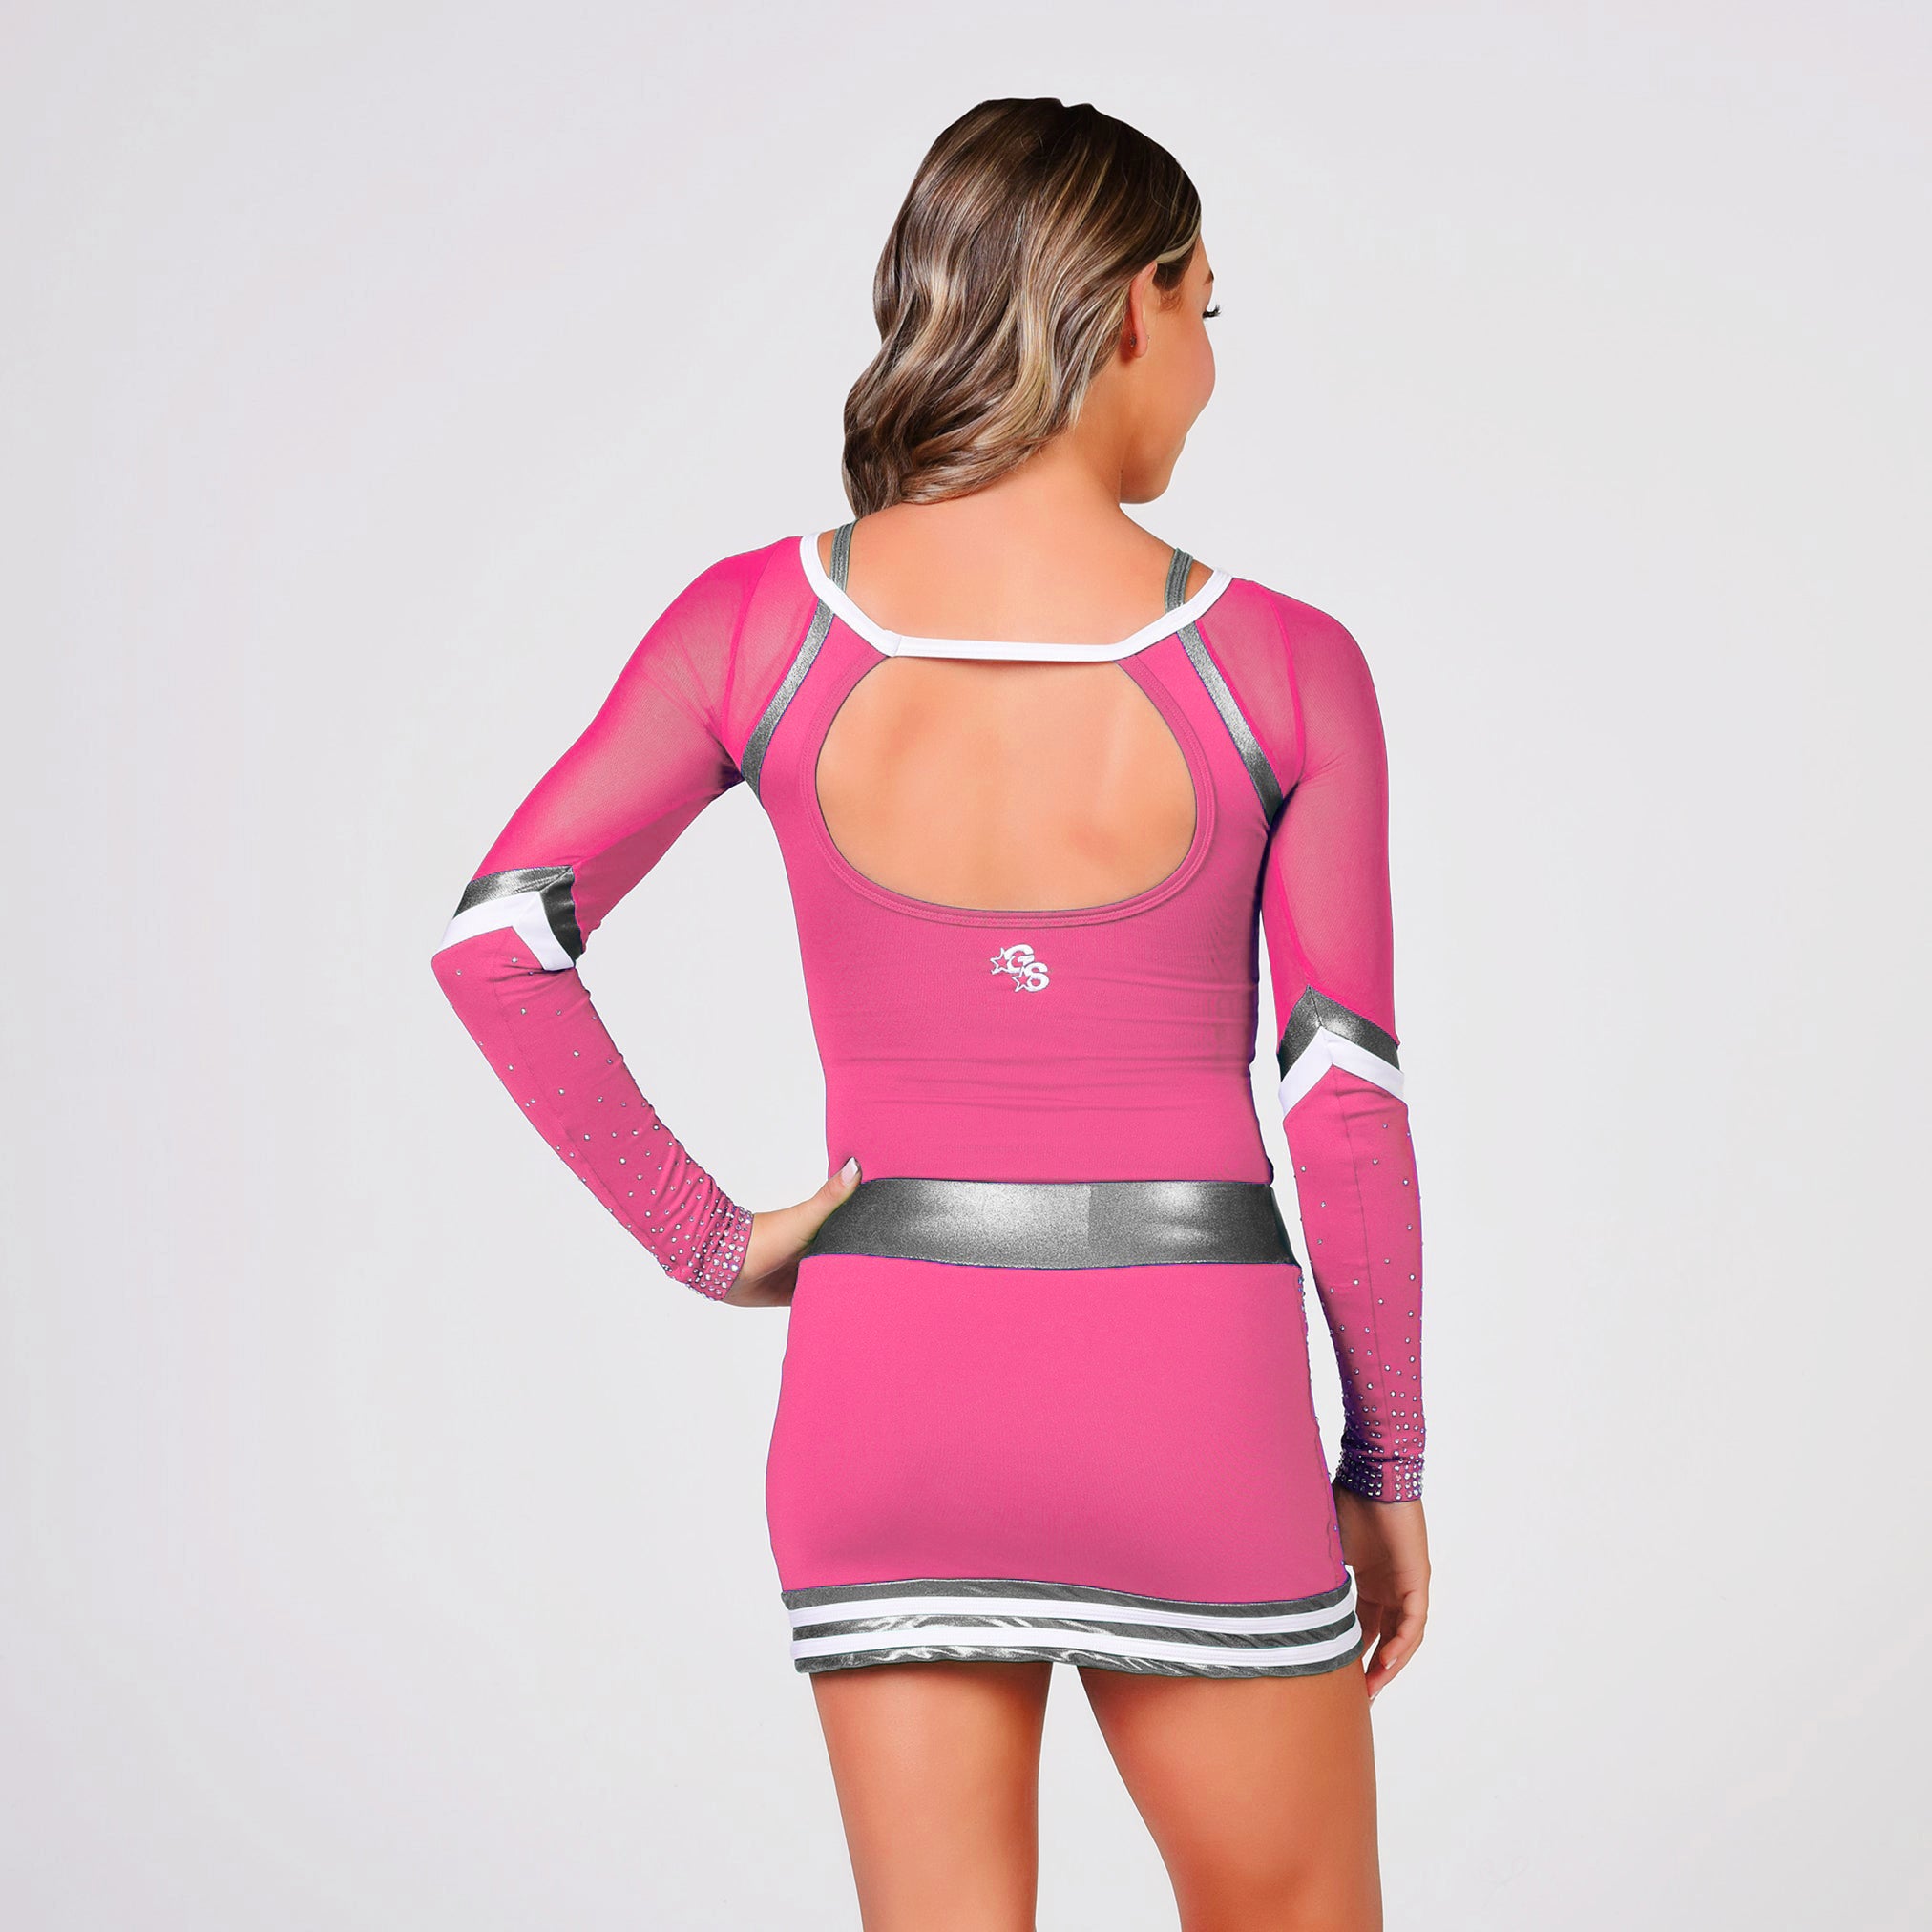 Journey Uniform with Mesh Sleeves - Pink